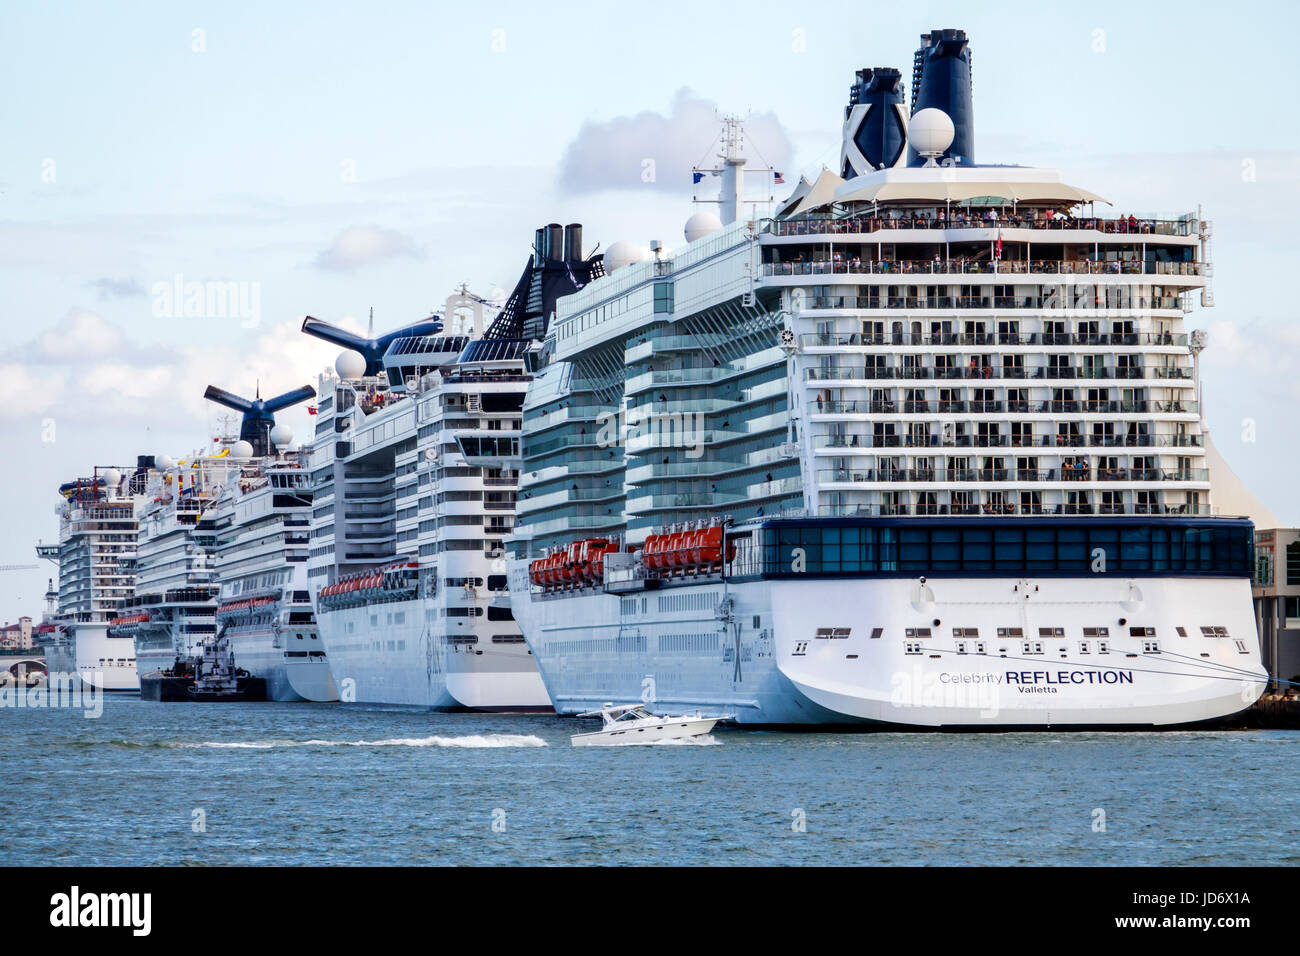 Miami Florida,Downtown,Port of Miami,cruise ships,docked,motor boat,water,Celebrity,Reflection,FL170331244 Stock Photo